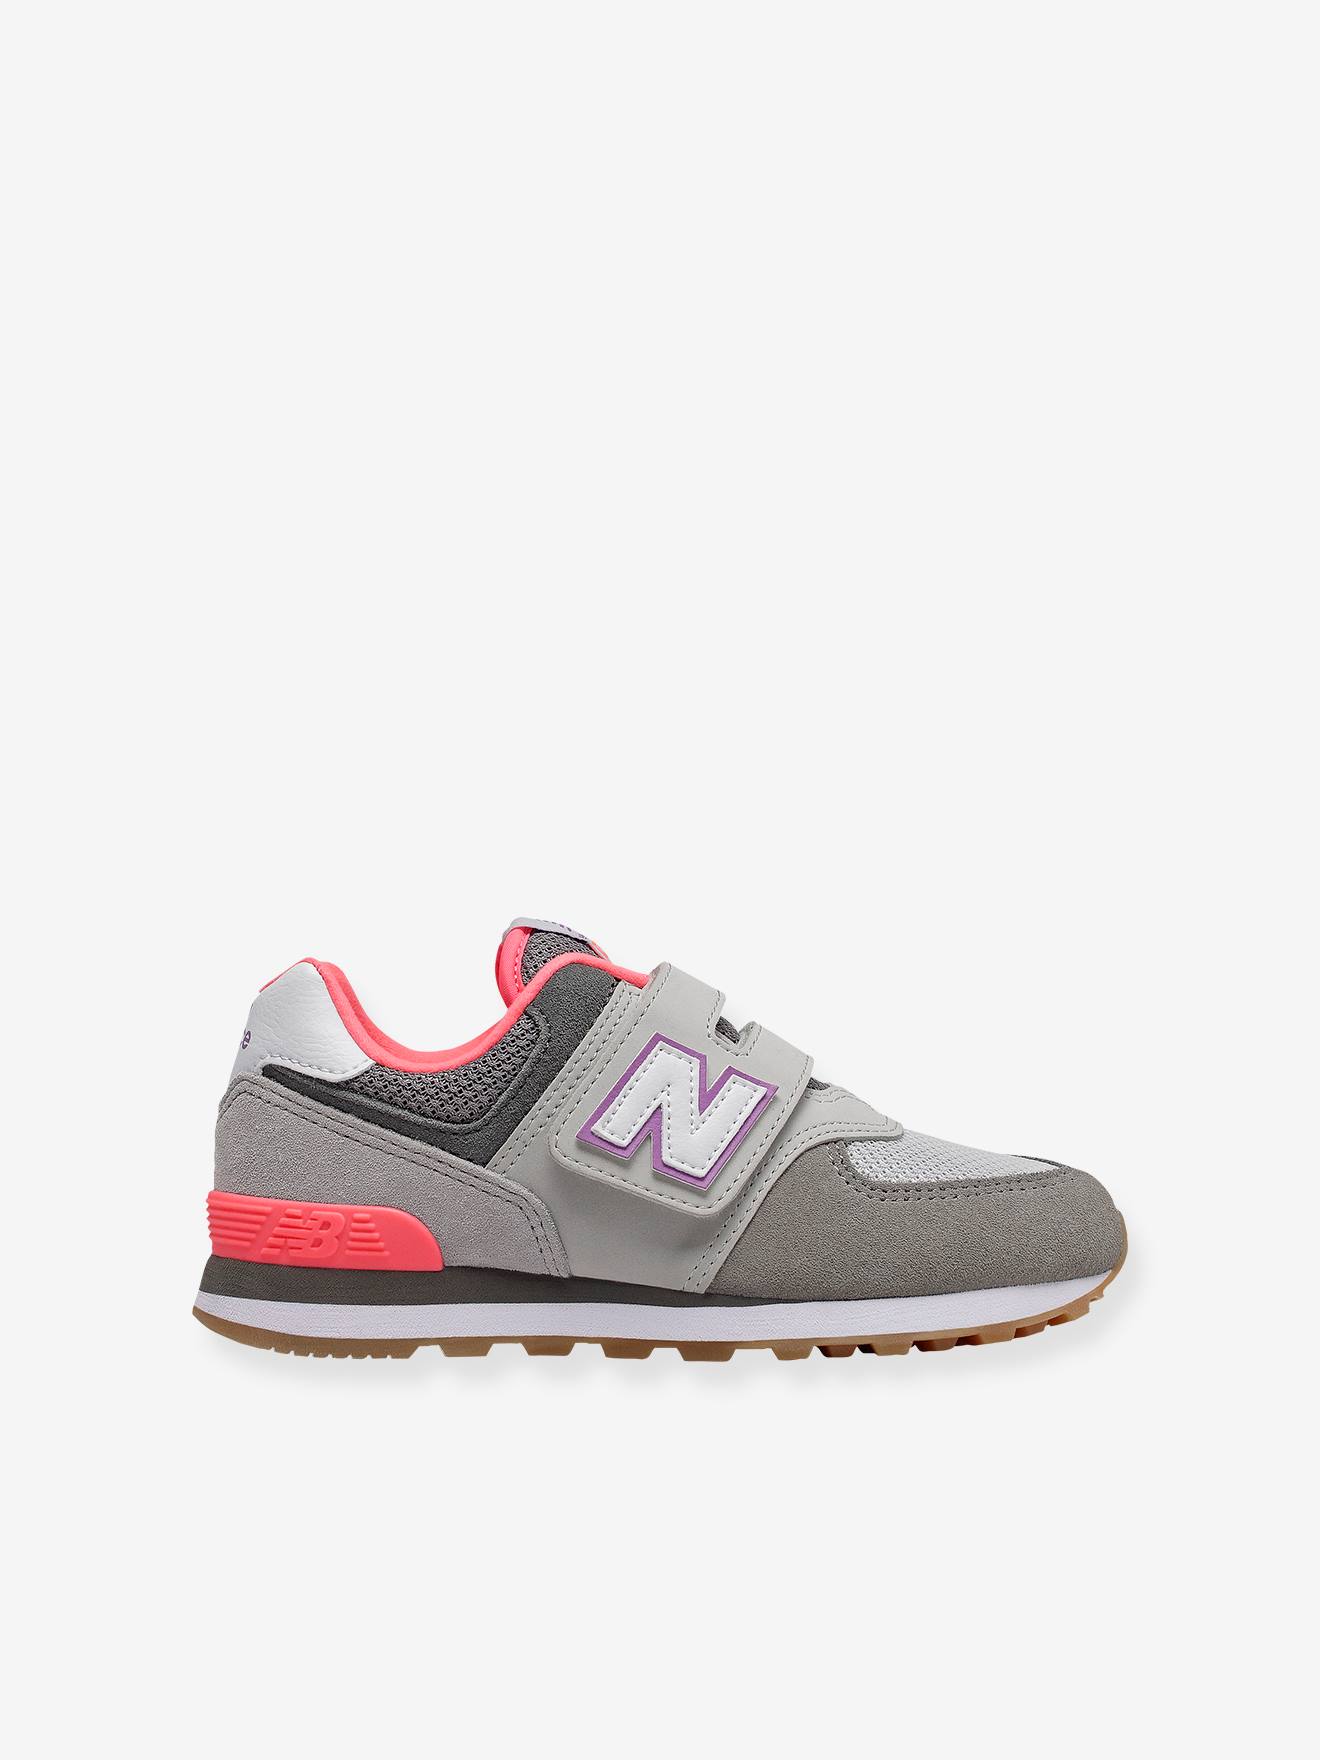 new balance fille 37 Cheaper Than Retail Price> Buy Clothing ...